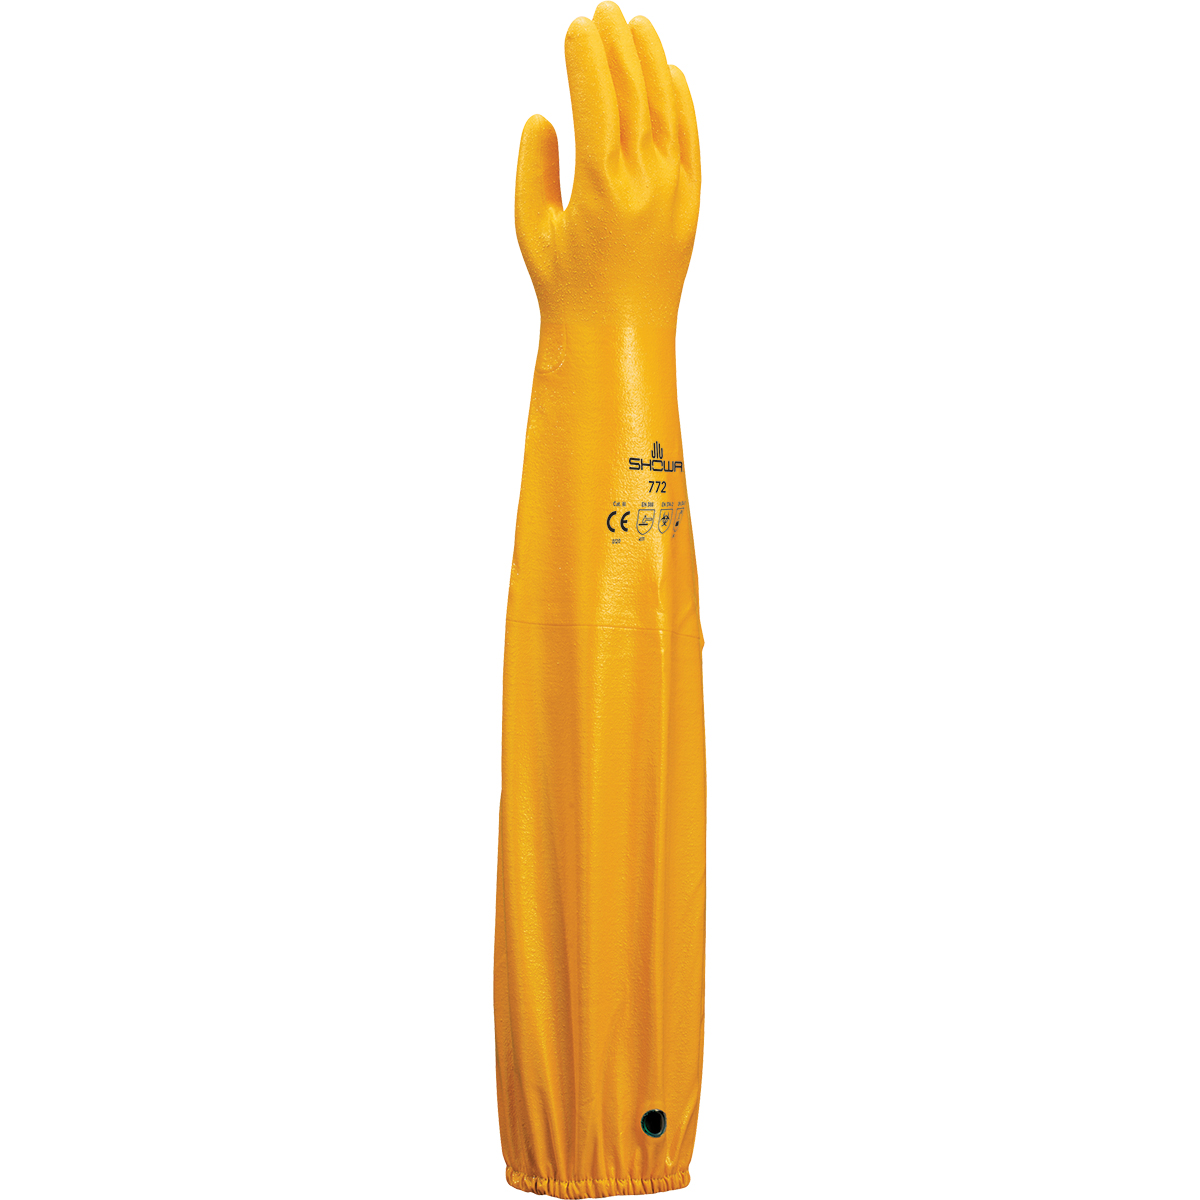 Chemical resistant nitrile, fully coated, double dipped, yellow, seamless knitted liner, 26" length, rough finish, medium